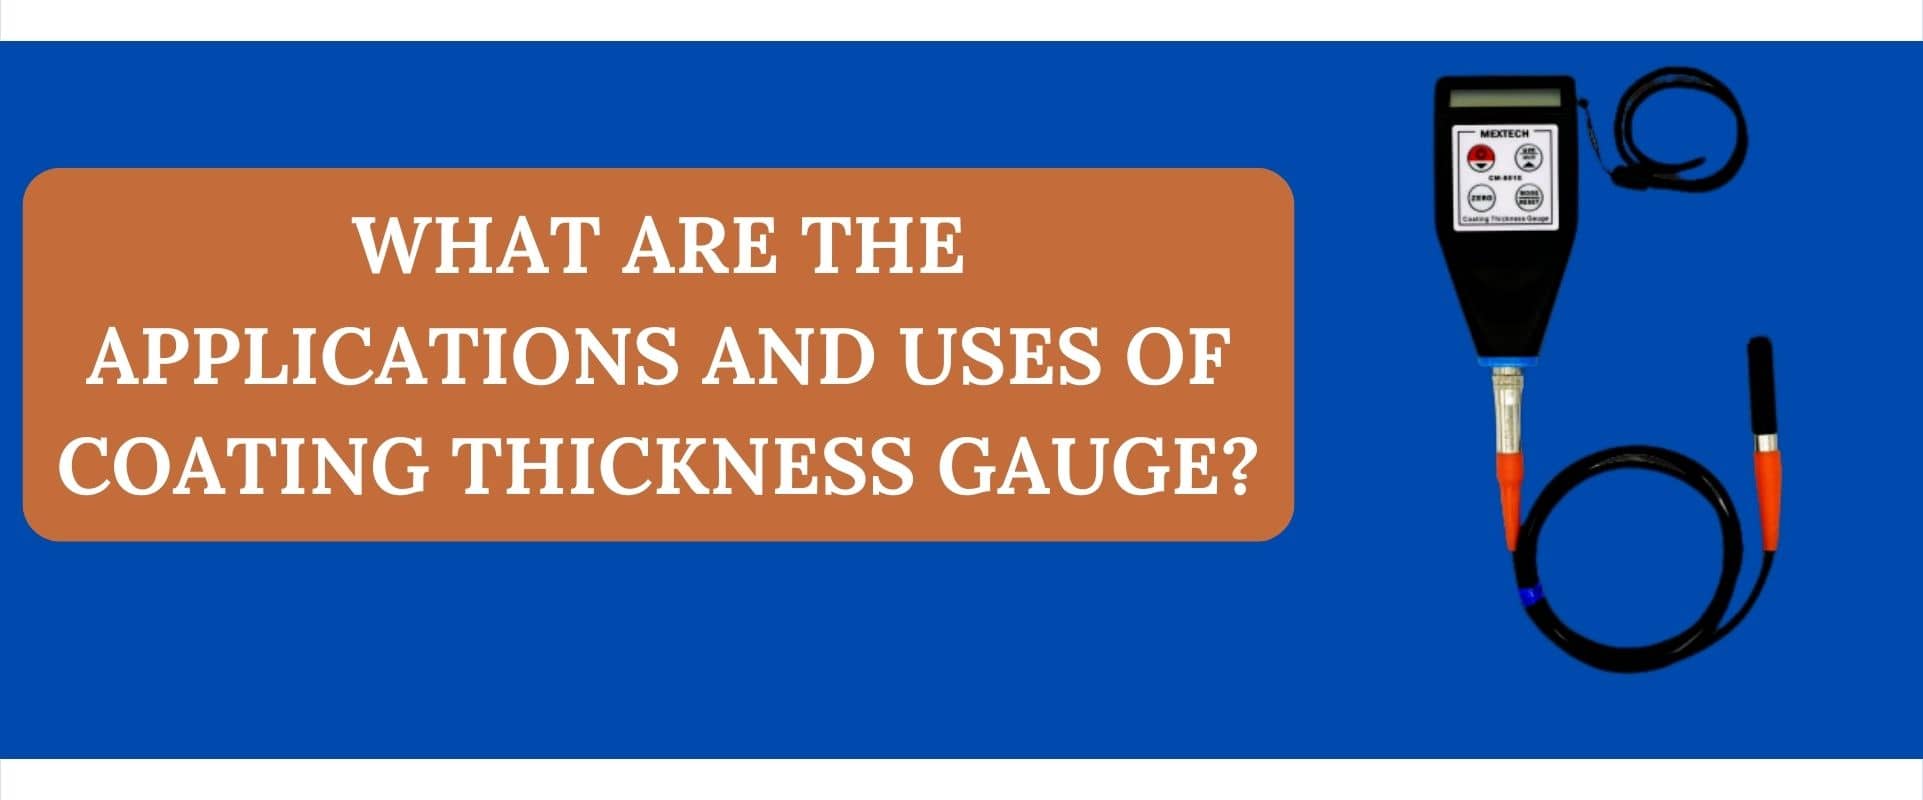 Applications and Uses of Coating Thickness Gauge